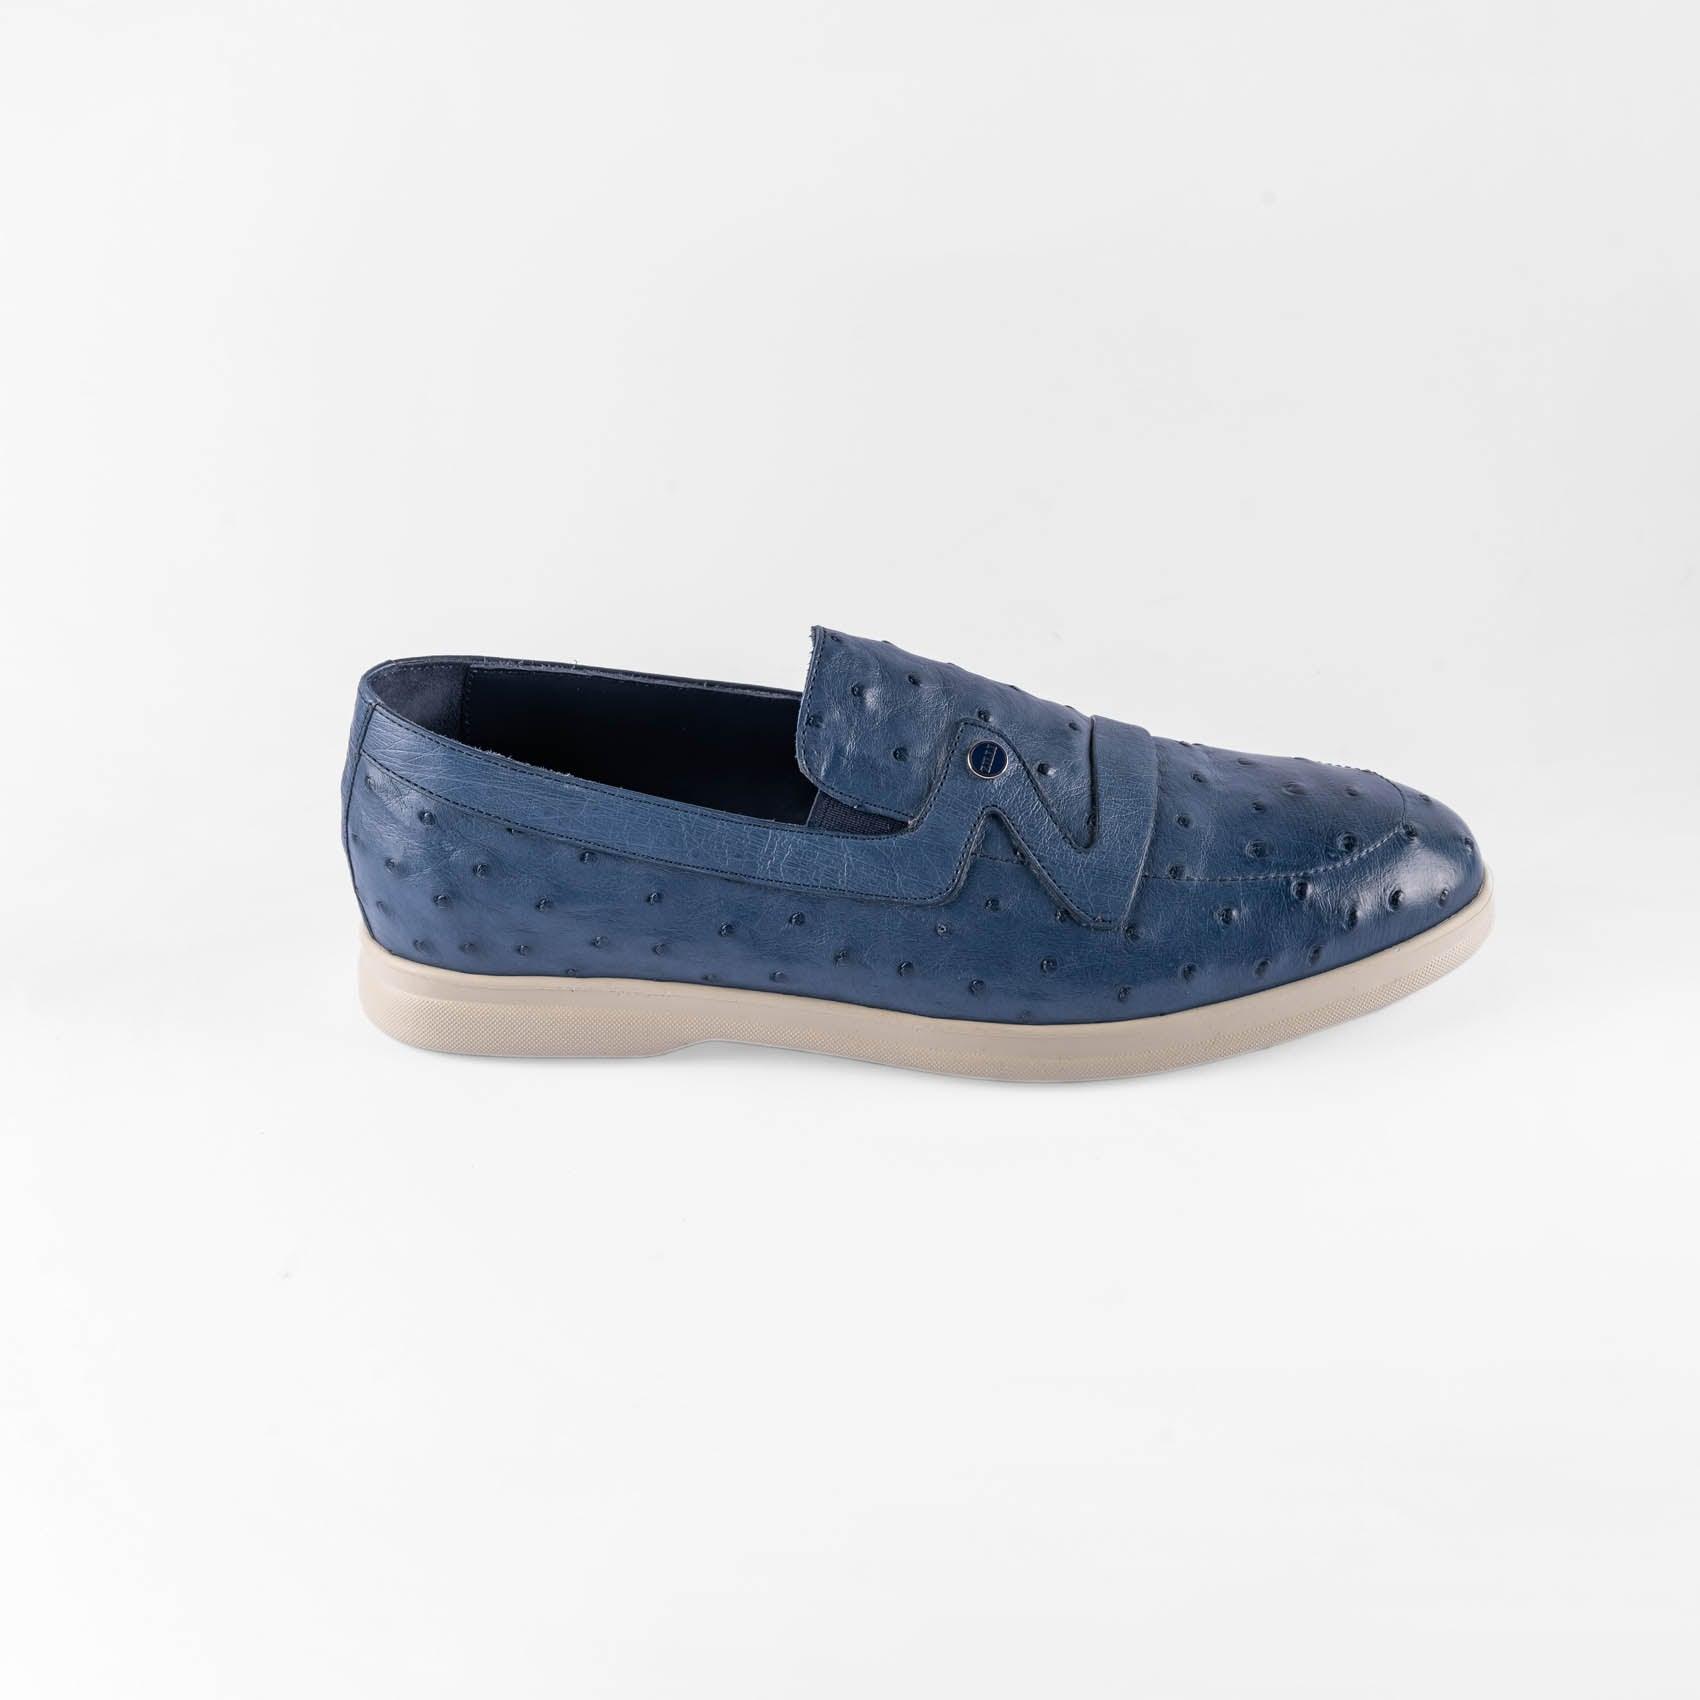 Shoes loafer casual ostrich leather - ZILLI